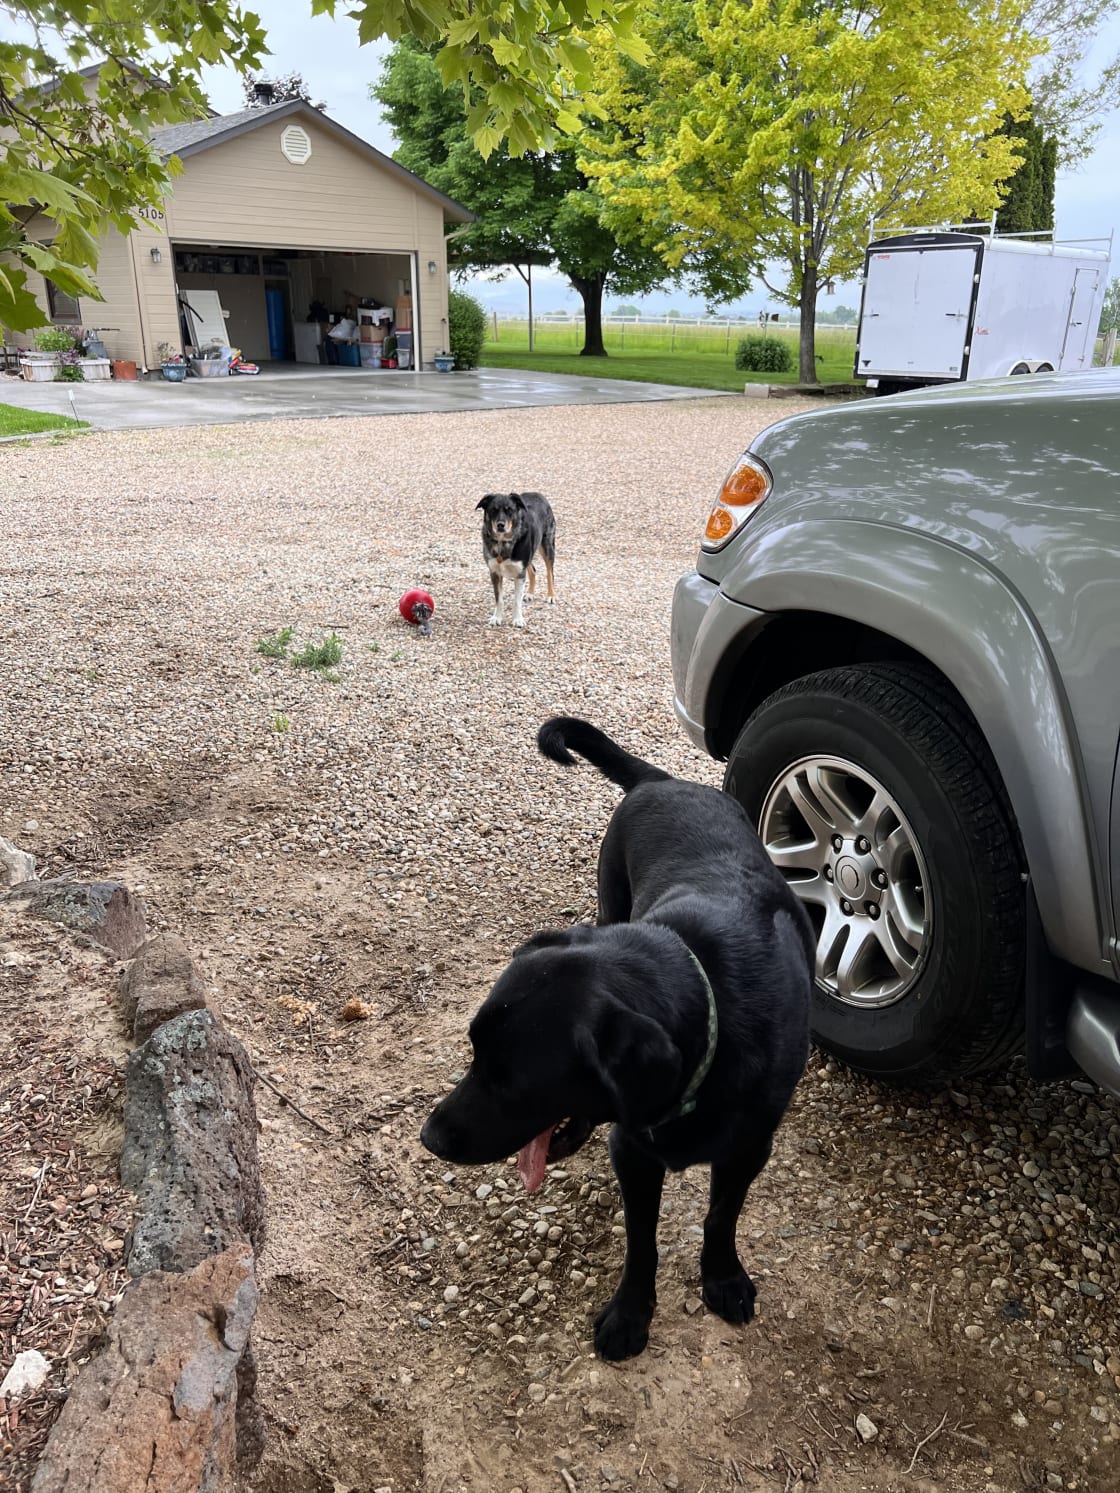 These are the two dogs on the property that are friendly.